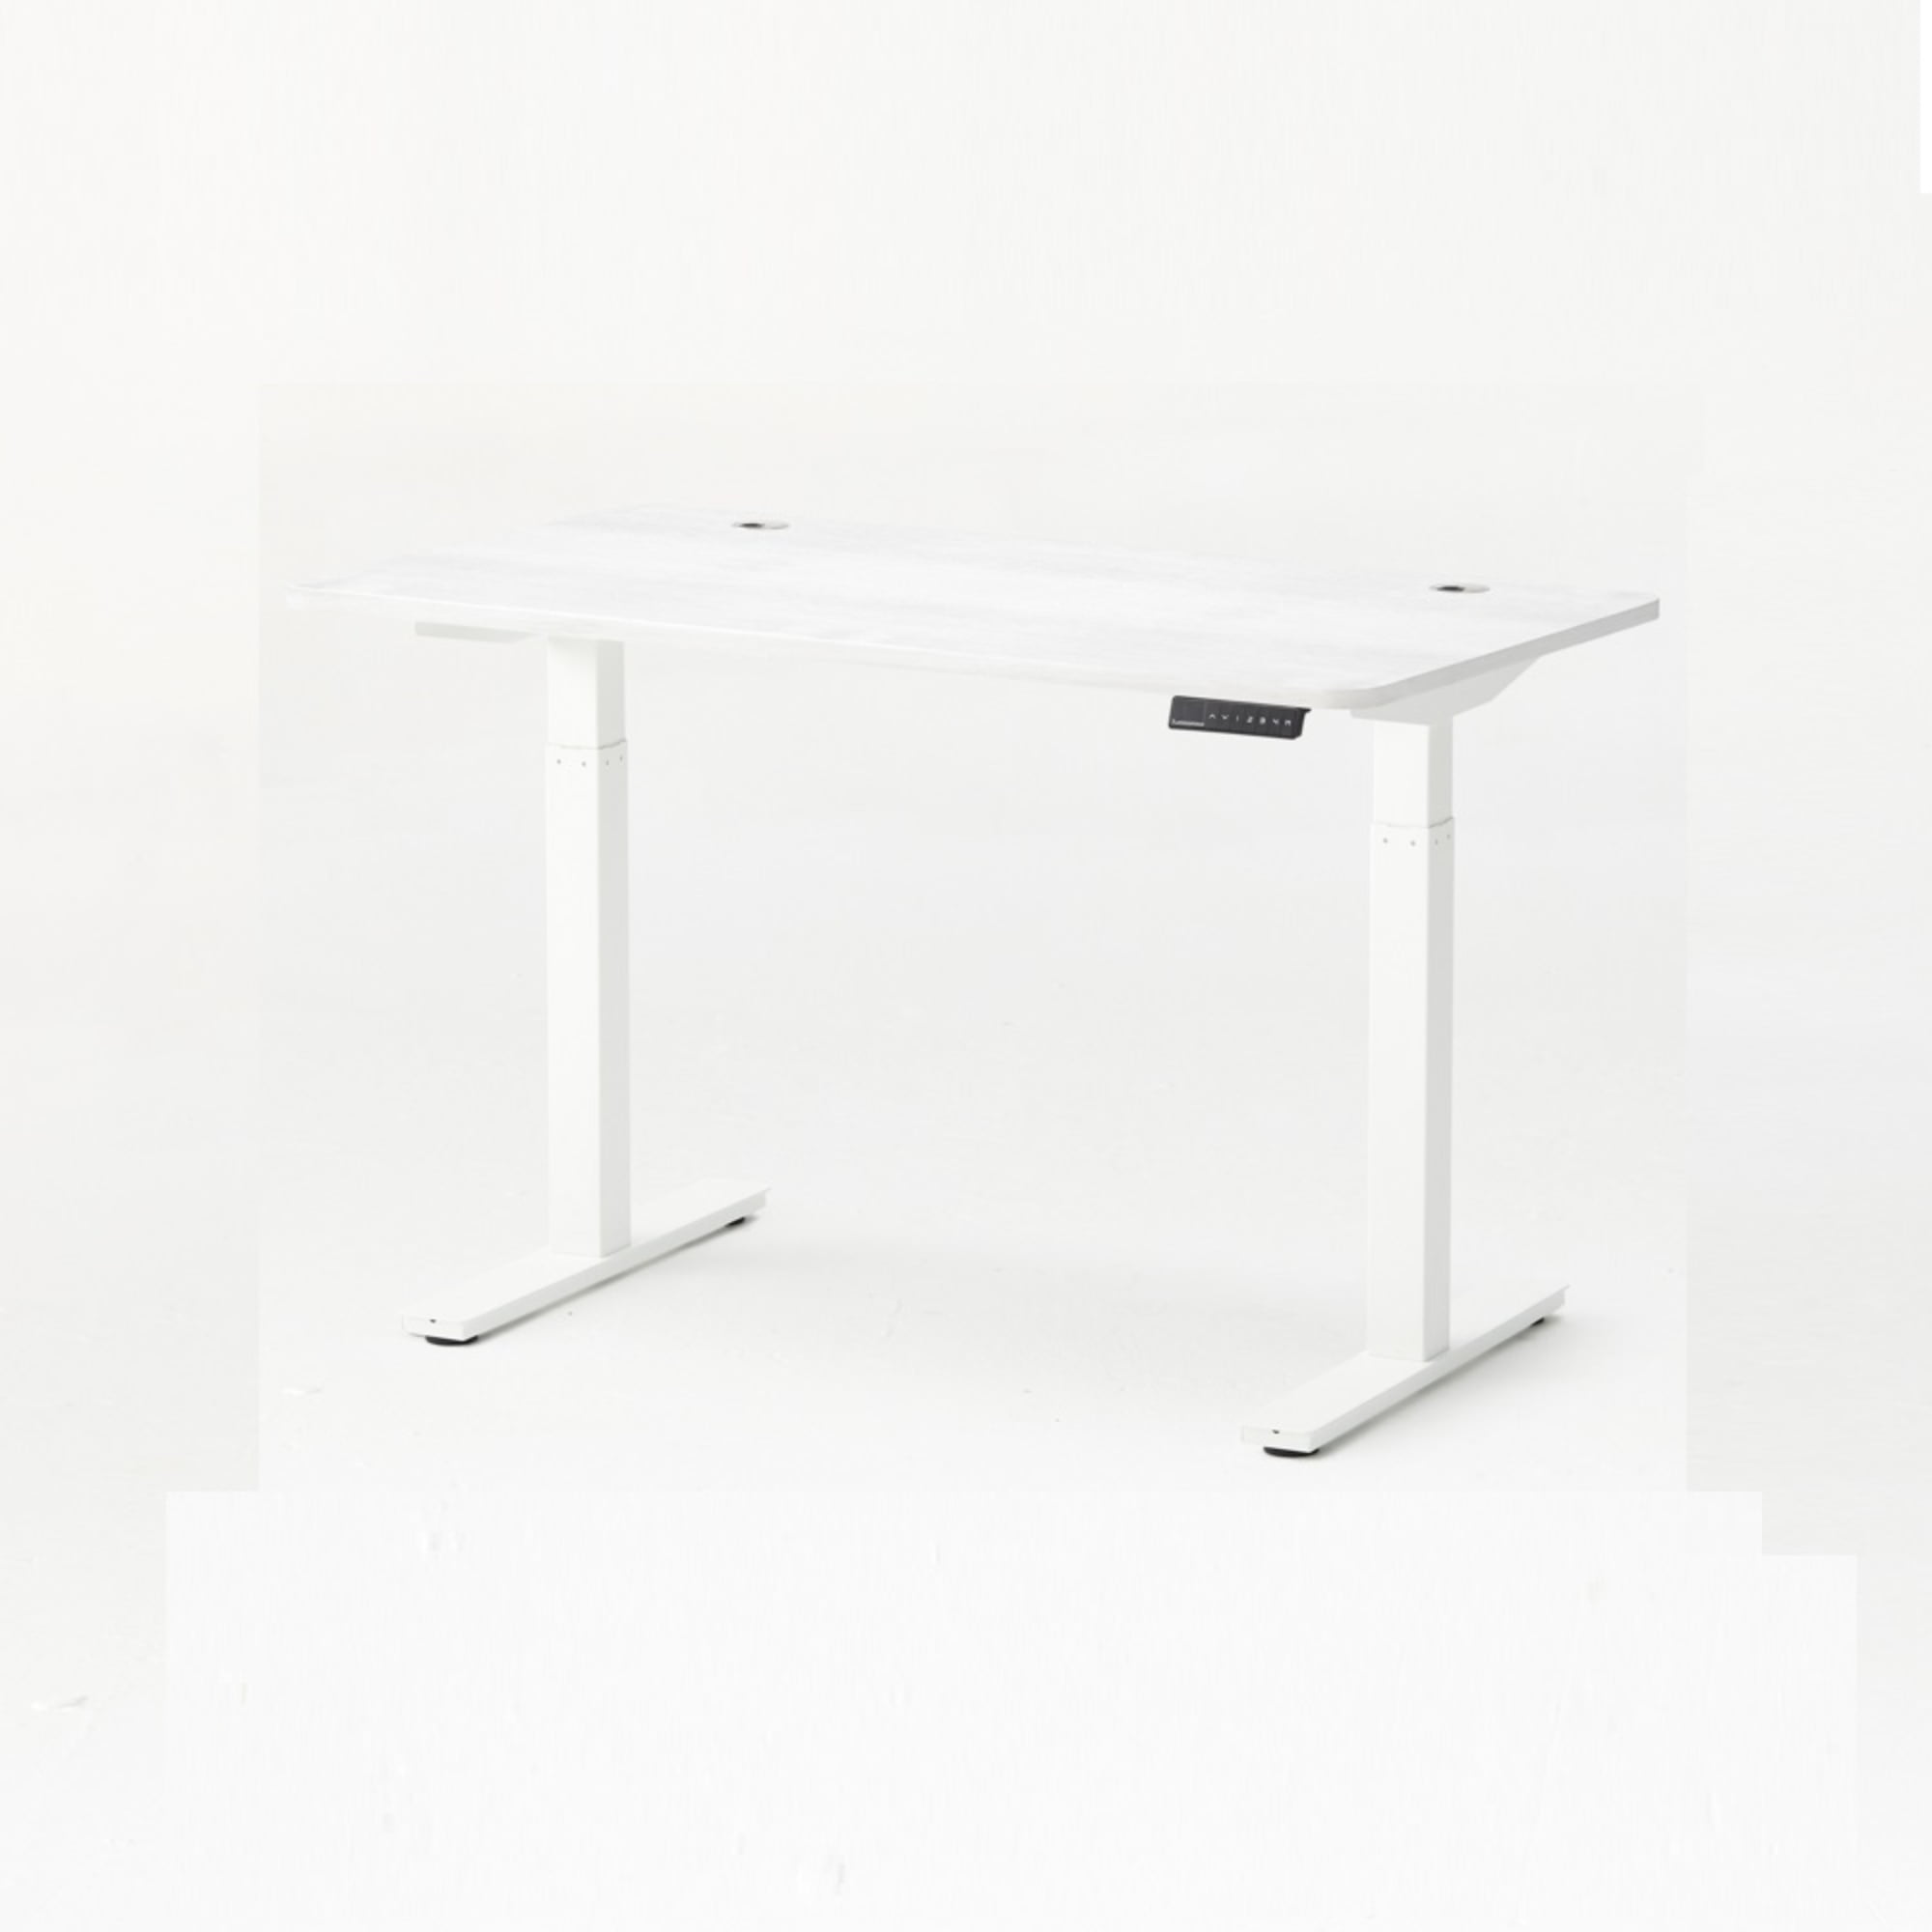 iMount 1400x800  Desk-top w/ Cable Holes for Sit-stand Desks in White 